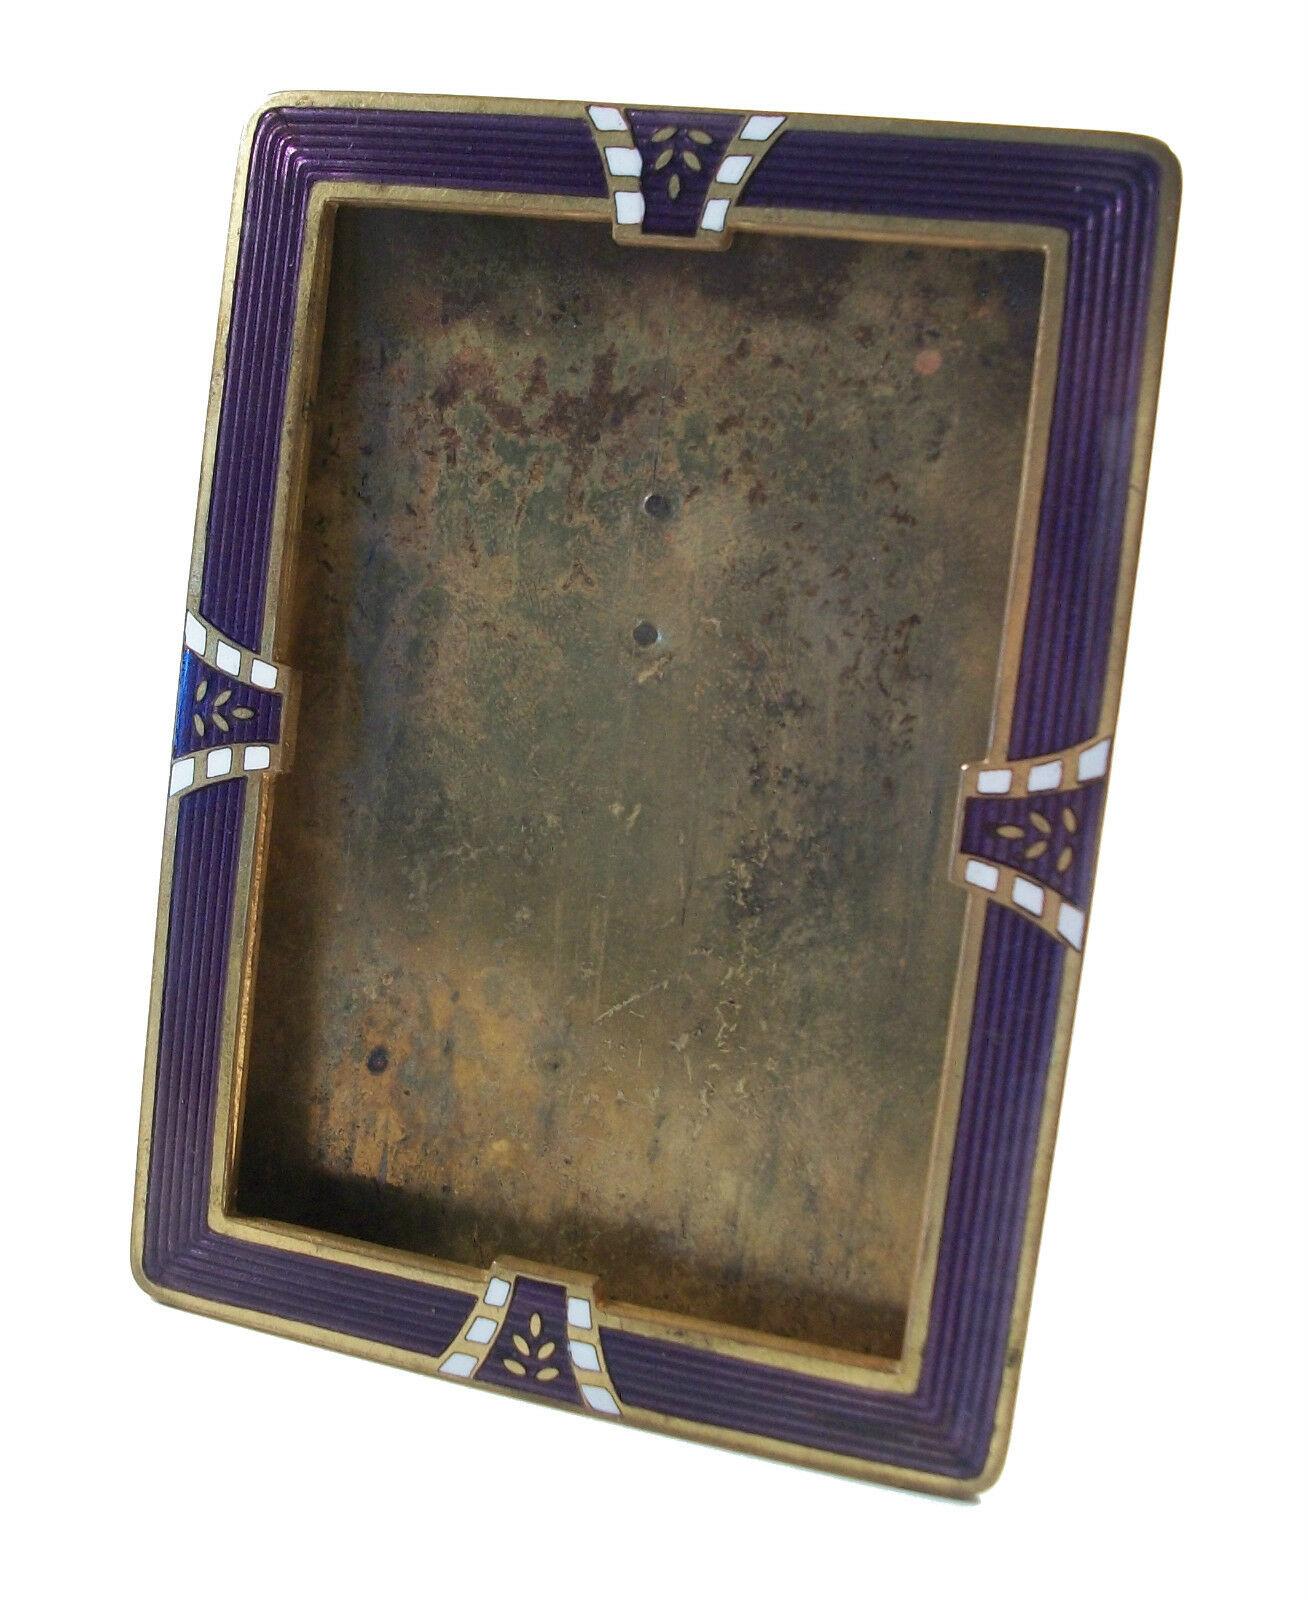 European Art Deco Enamel & Gilt Brass Picture Frame, Continental, Early 20th Century For Sale